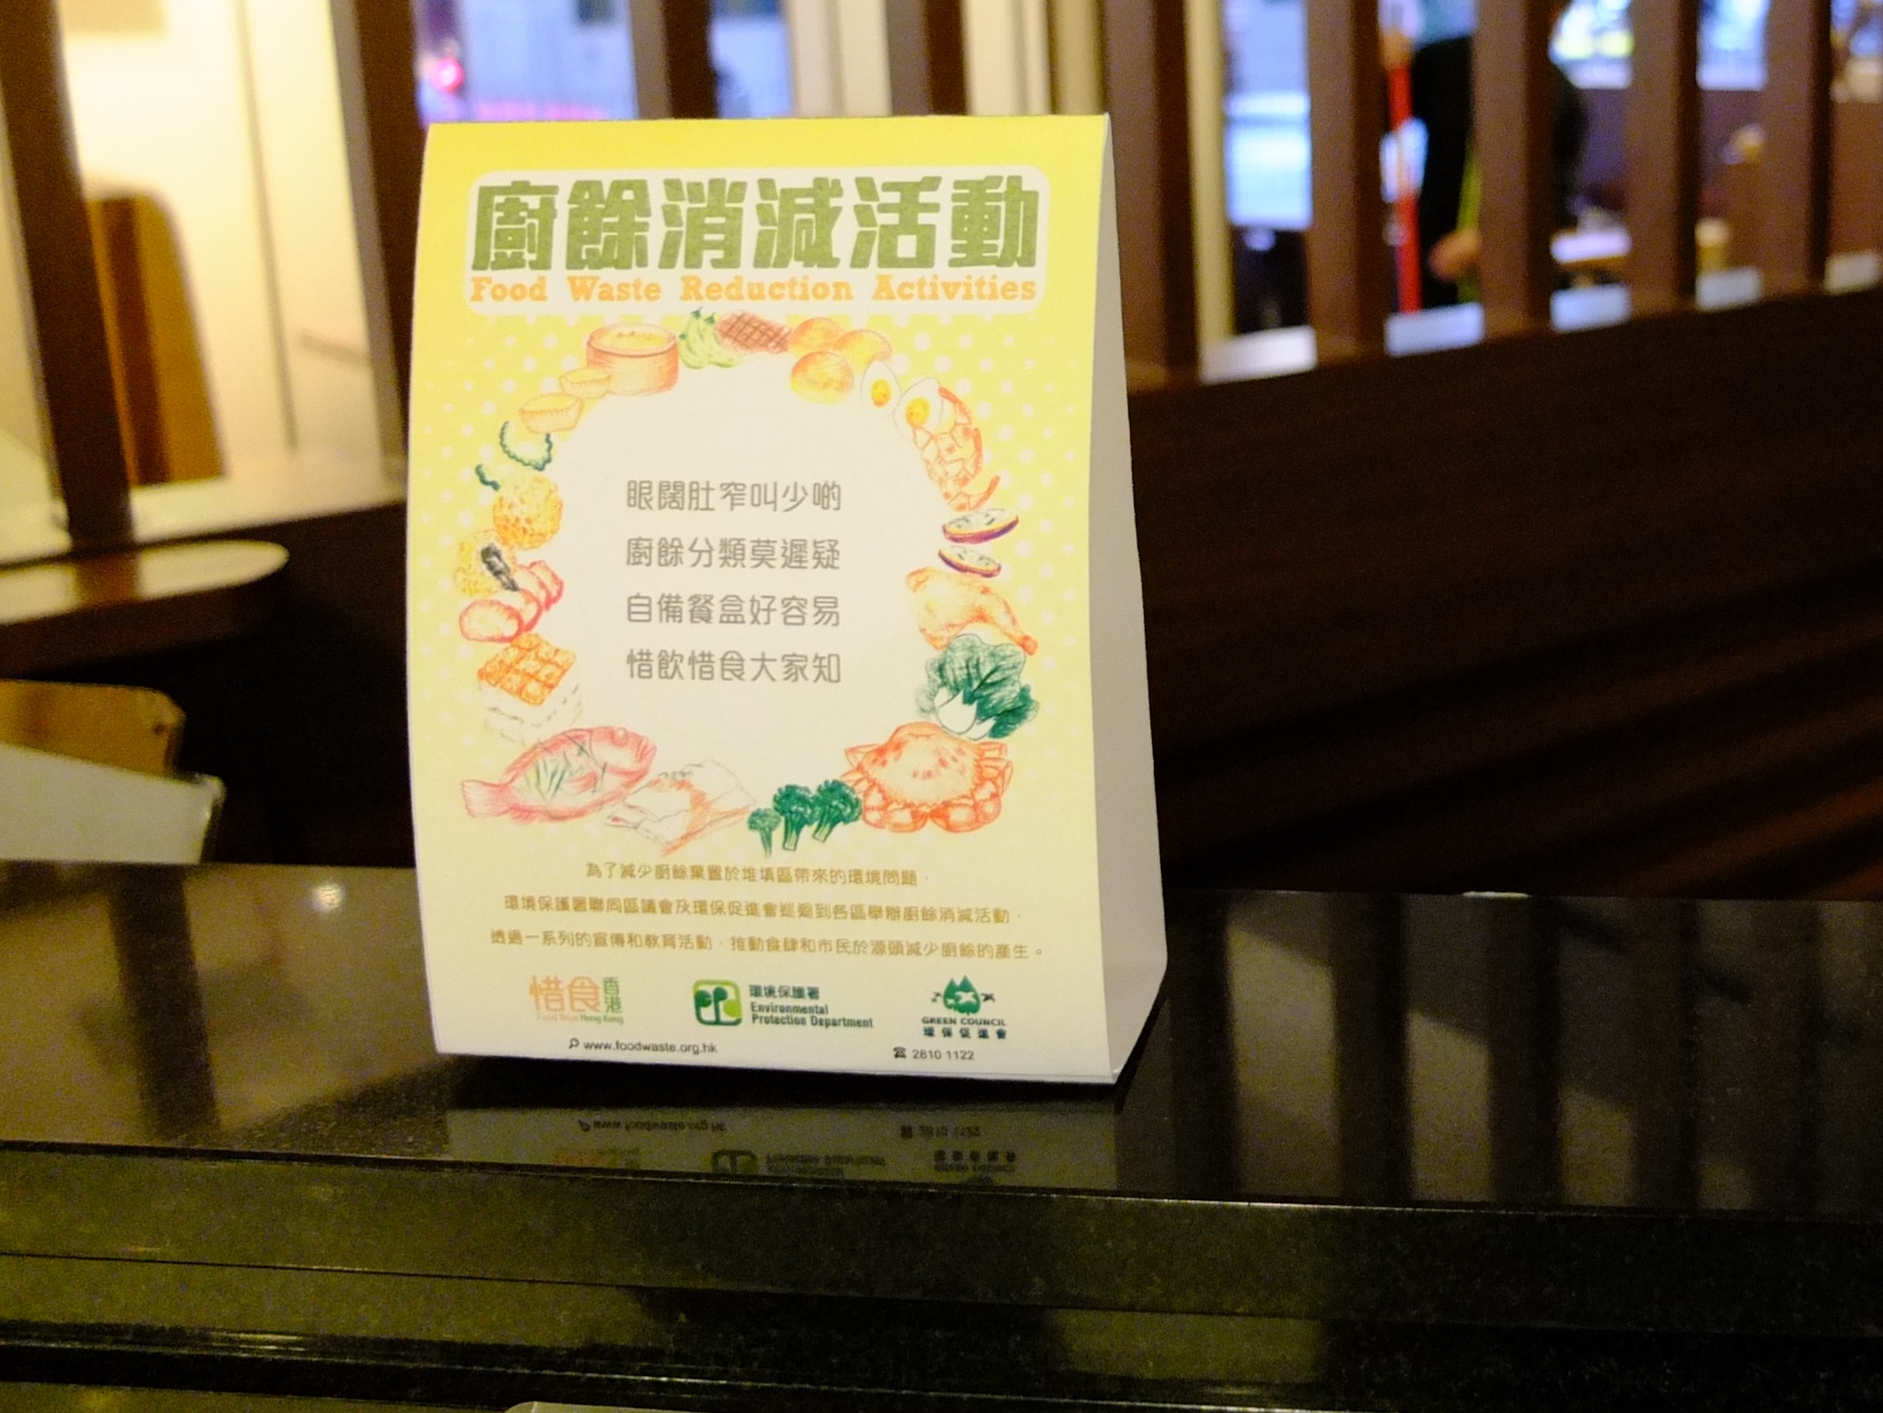 Tent Card in Food Waste Reduction Activities Participating Restaurants